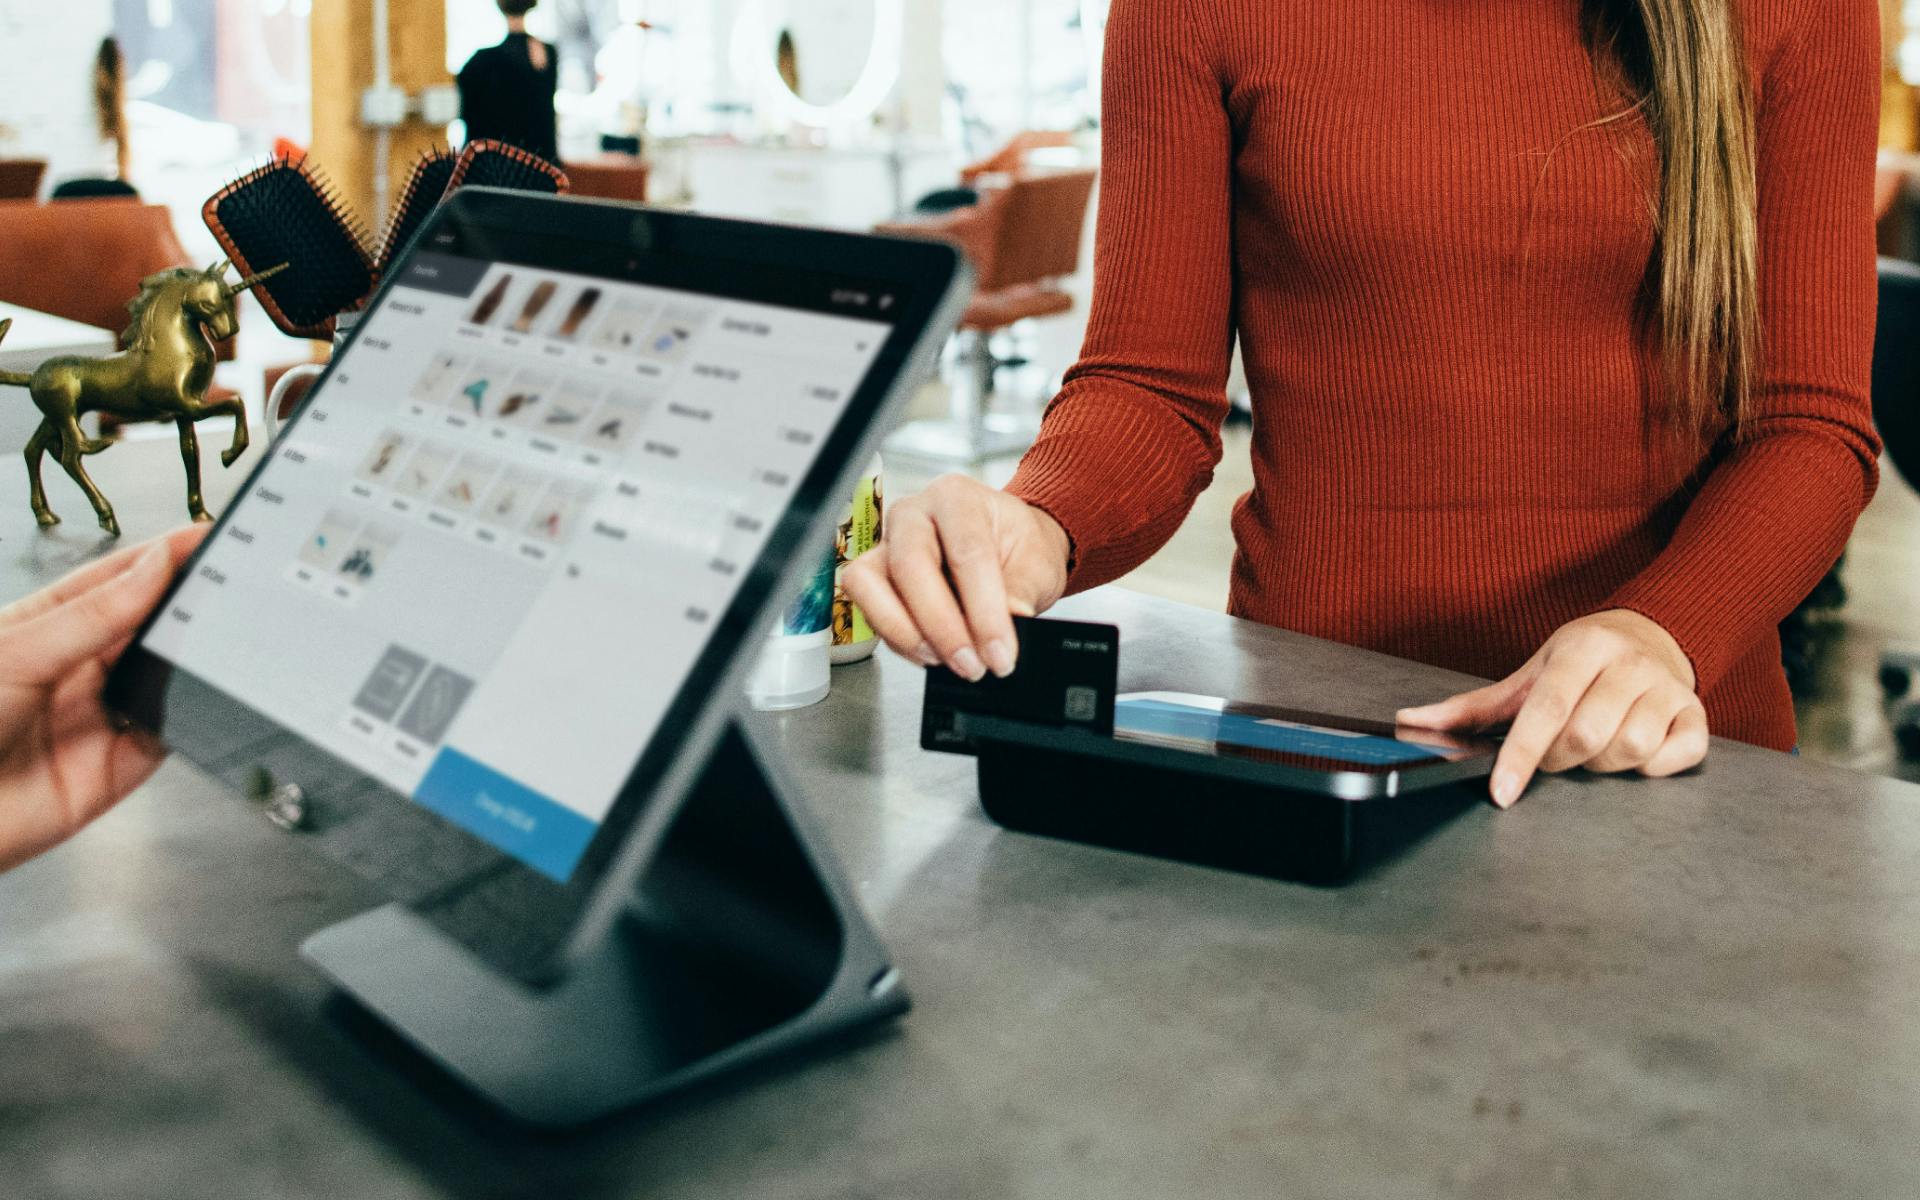 Photograph of a POS System with a customer swiping their credit card